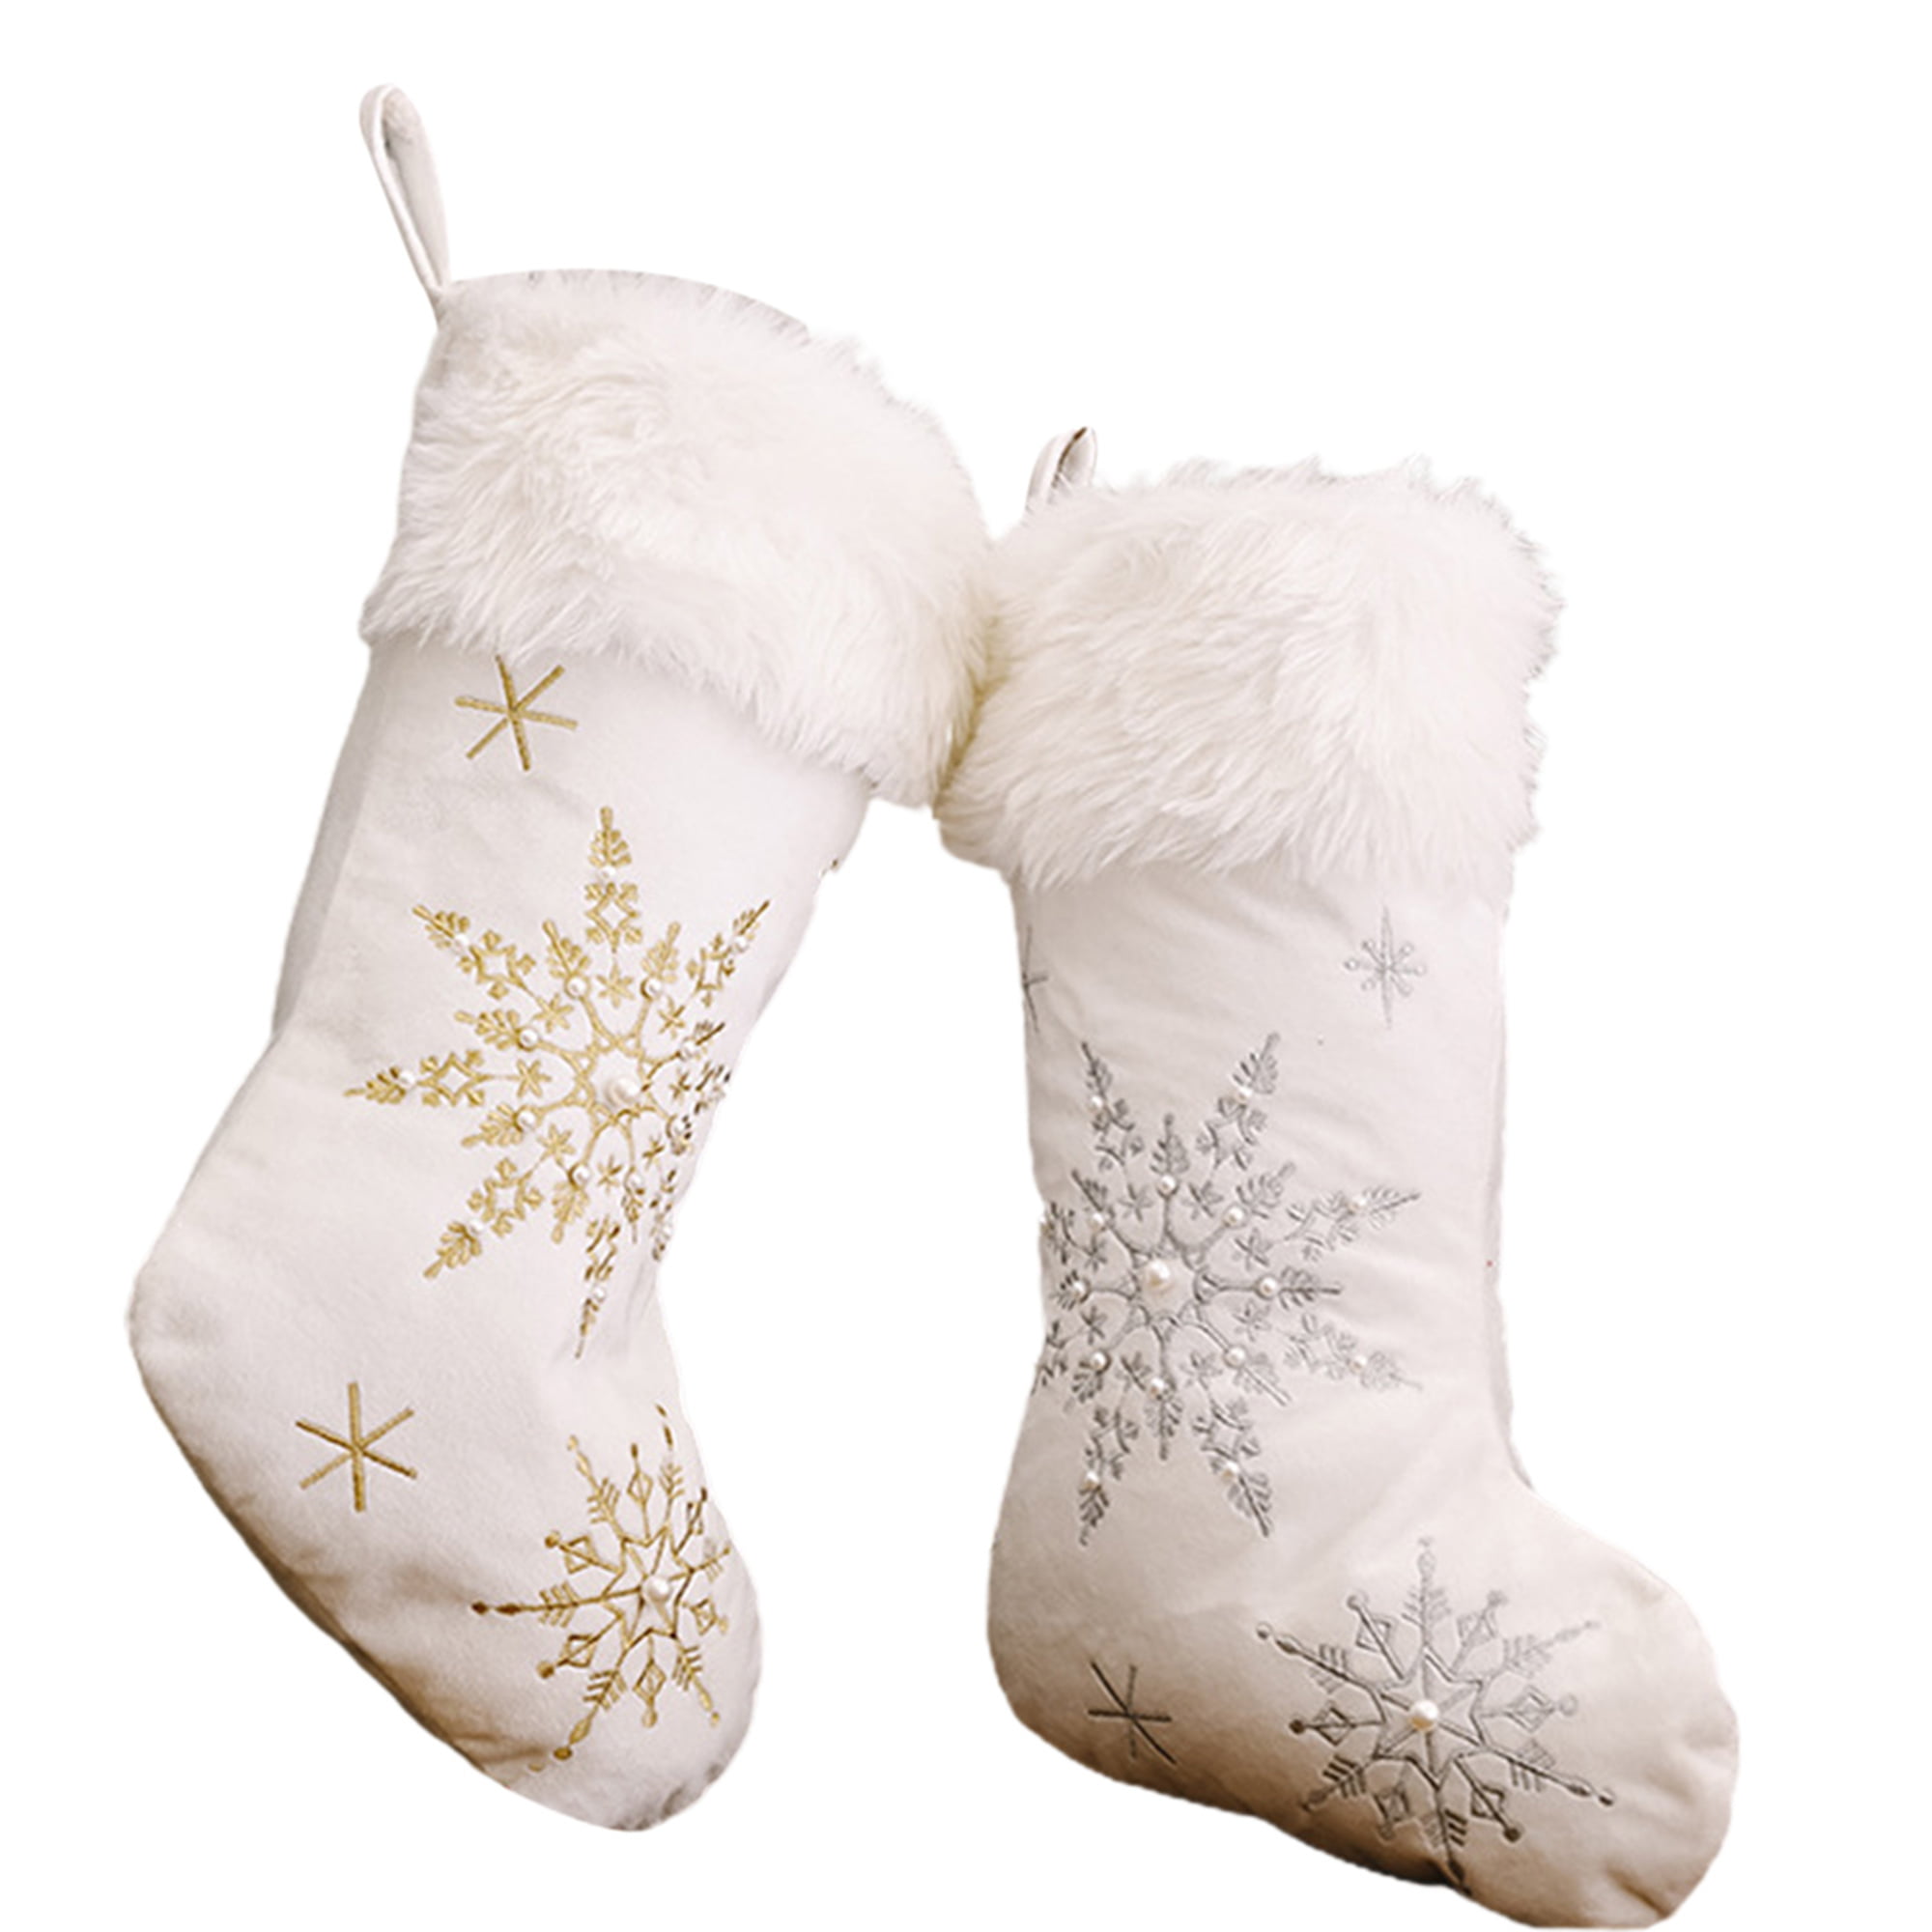 Details about   Xmas Flannel Pearl Snowflake Candy Bag Gifts Socks Tree Hanging Decoration 